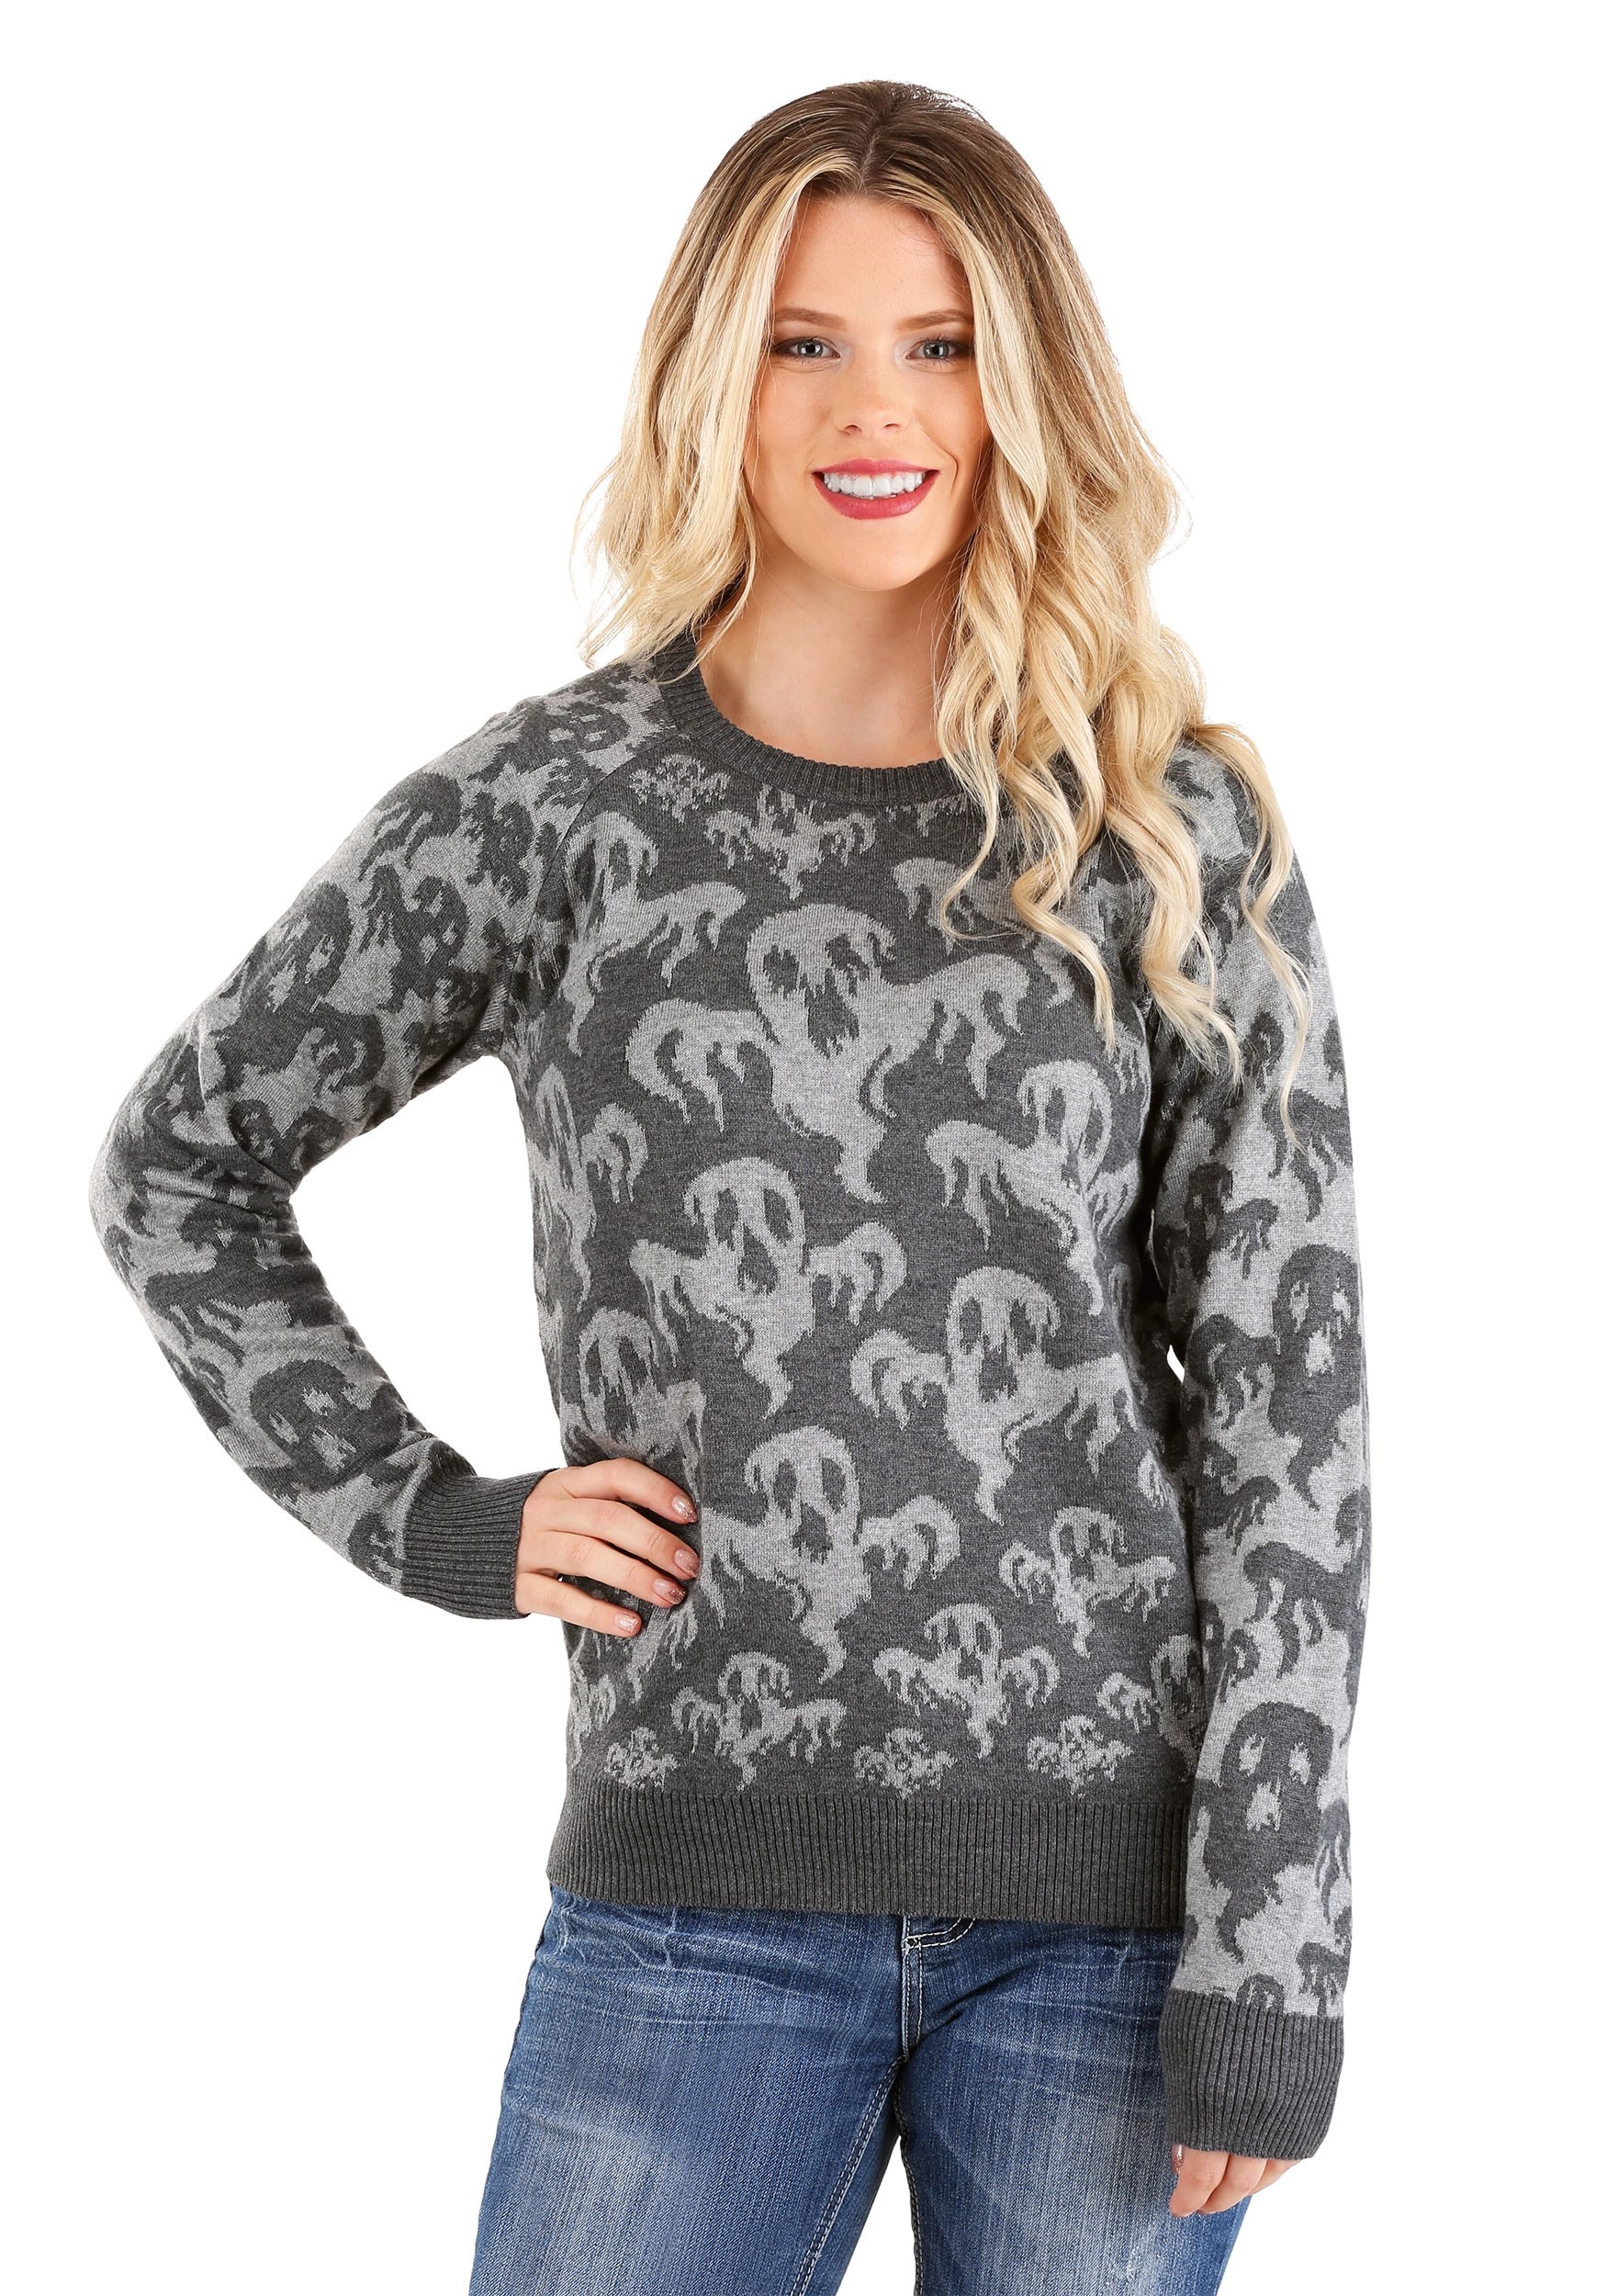 Photos - Fancy Dress FUN Wear Ghoulish Ghosts Halloween Sweater for Adults | Exclusive Gray